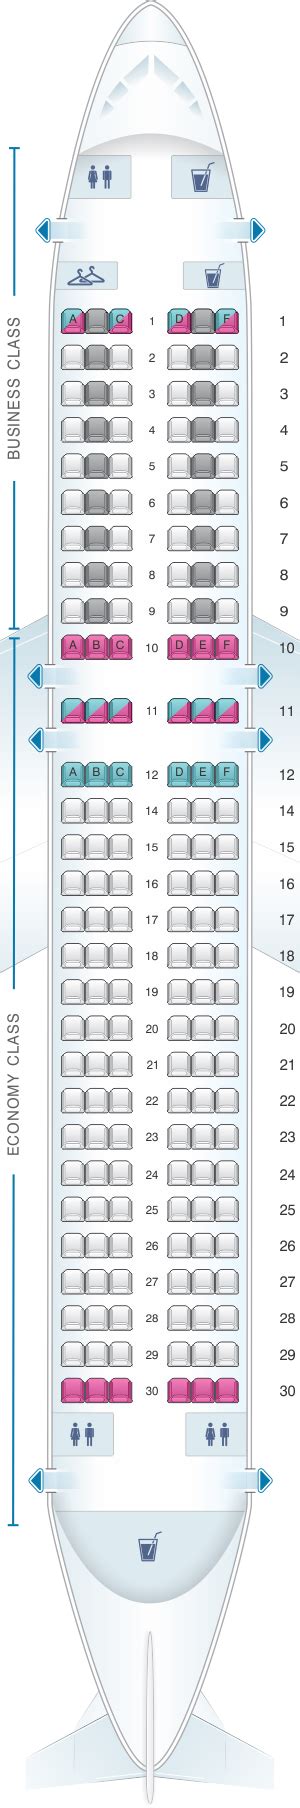 Learn About 100 Imagen Air France Seat Map Vn